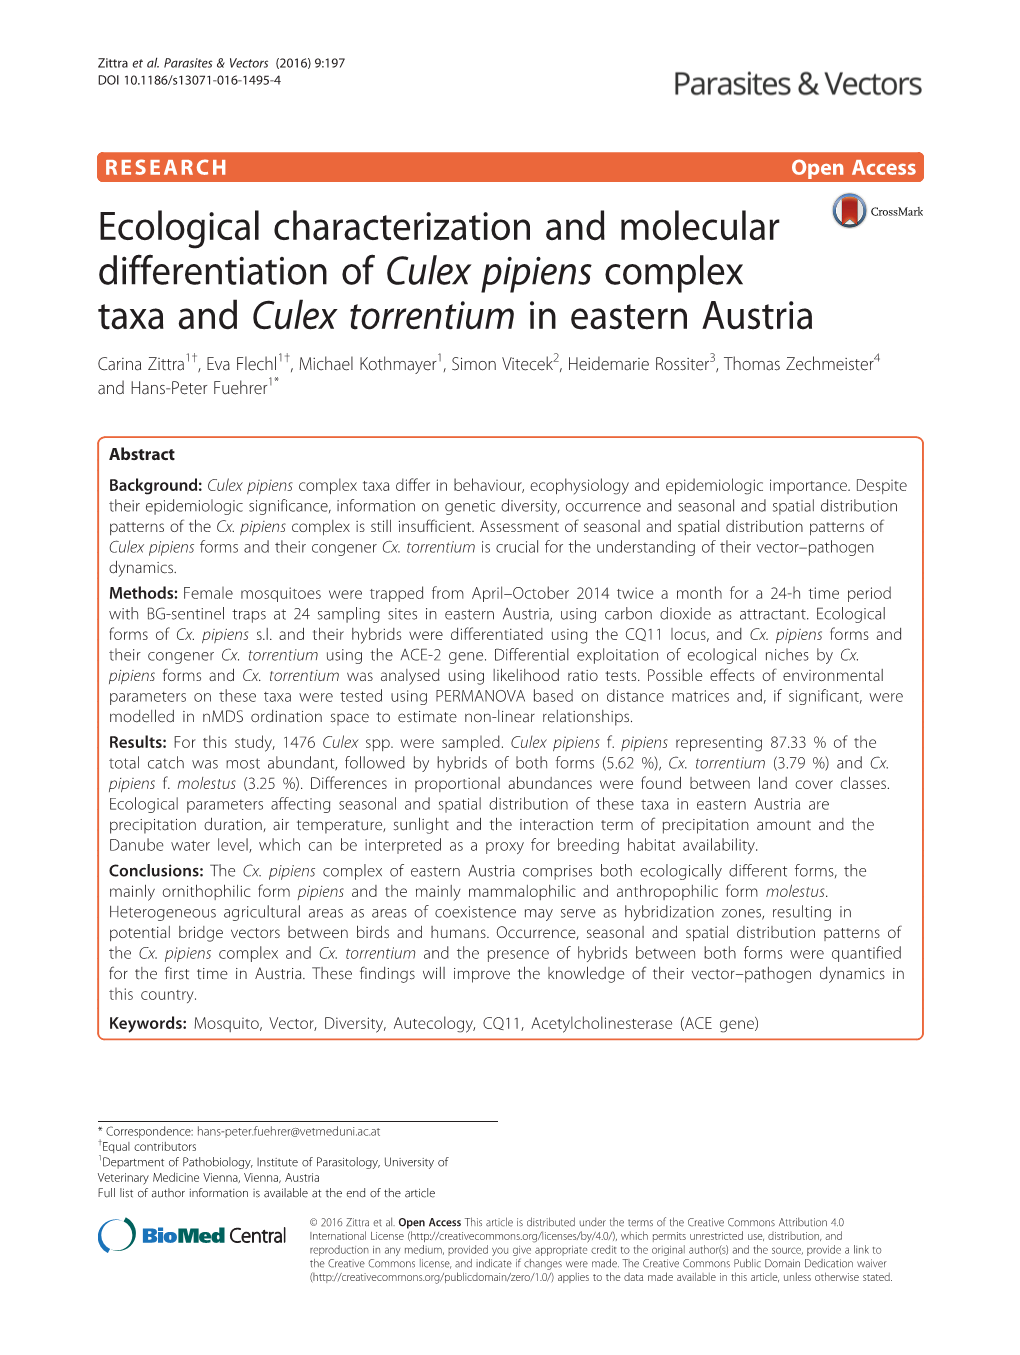 Ecological Characterization and Molecular Differentiation of Culex